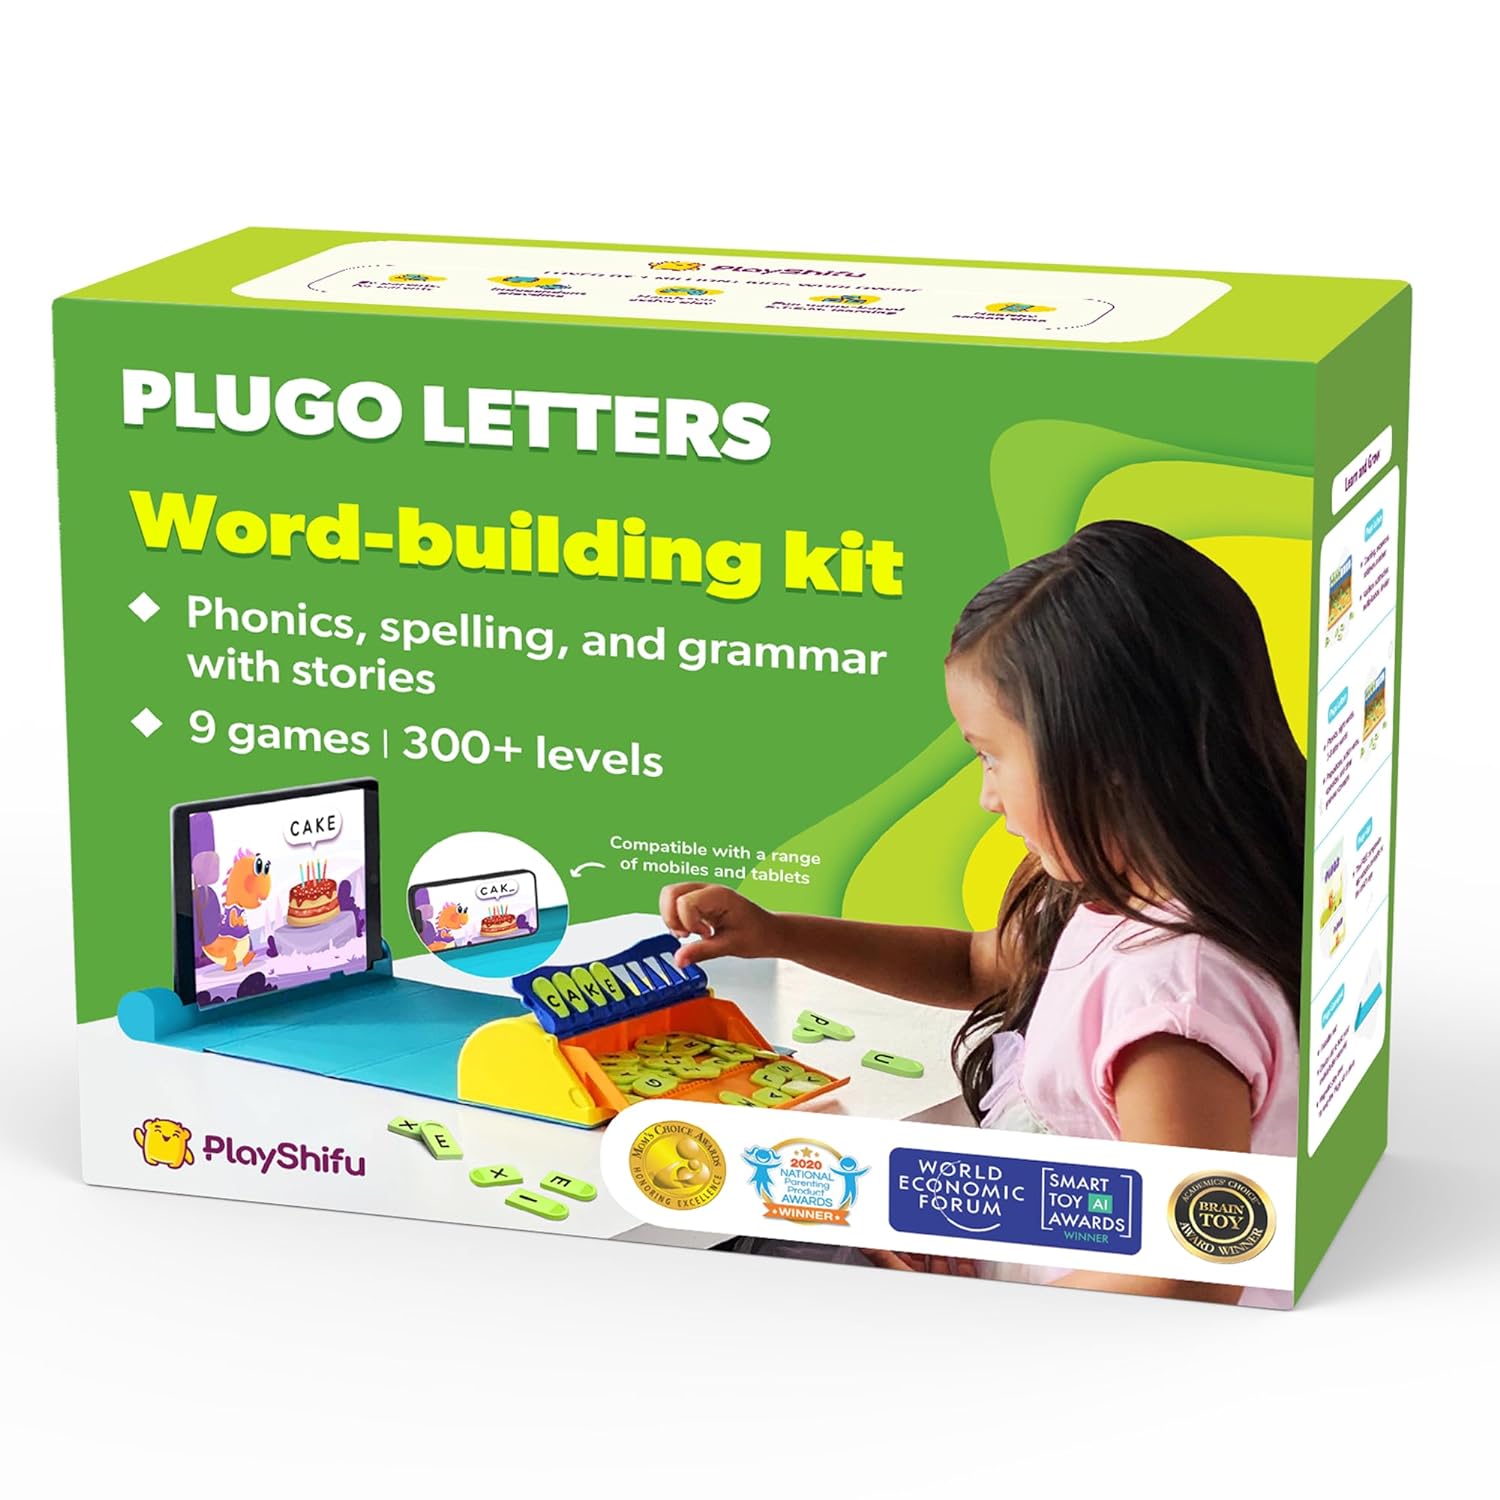 Shifu Playshifu Educational Word Game-Plugo Letters(Kit + App With 9 Learning Games)Stem Toy Gifts For Kids Age 4 5 6 7 8|Phonics,Spellings&Grammar|48 Alphabet Tiles(Works With Tabs/Mobiles)